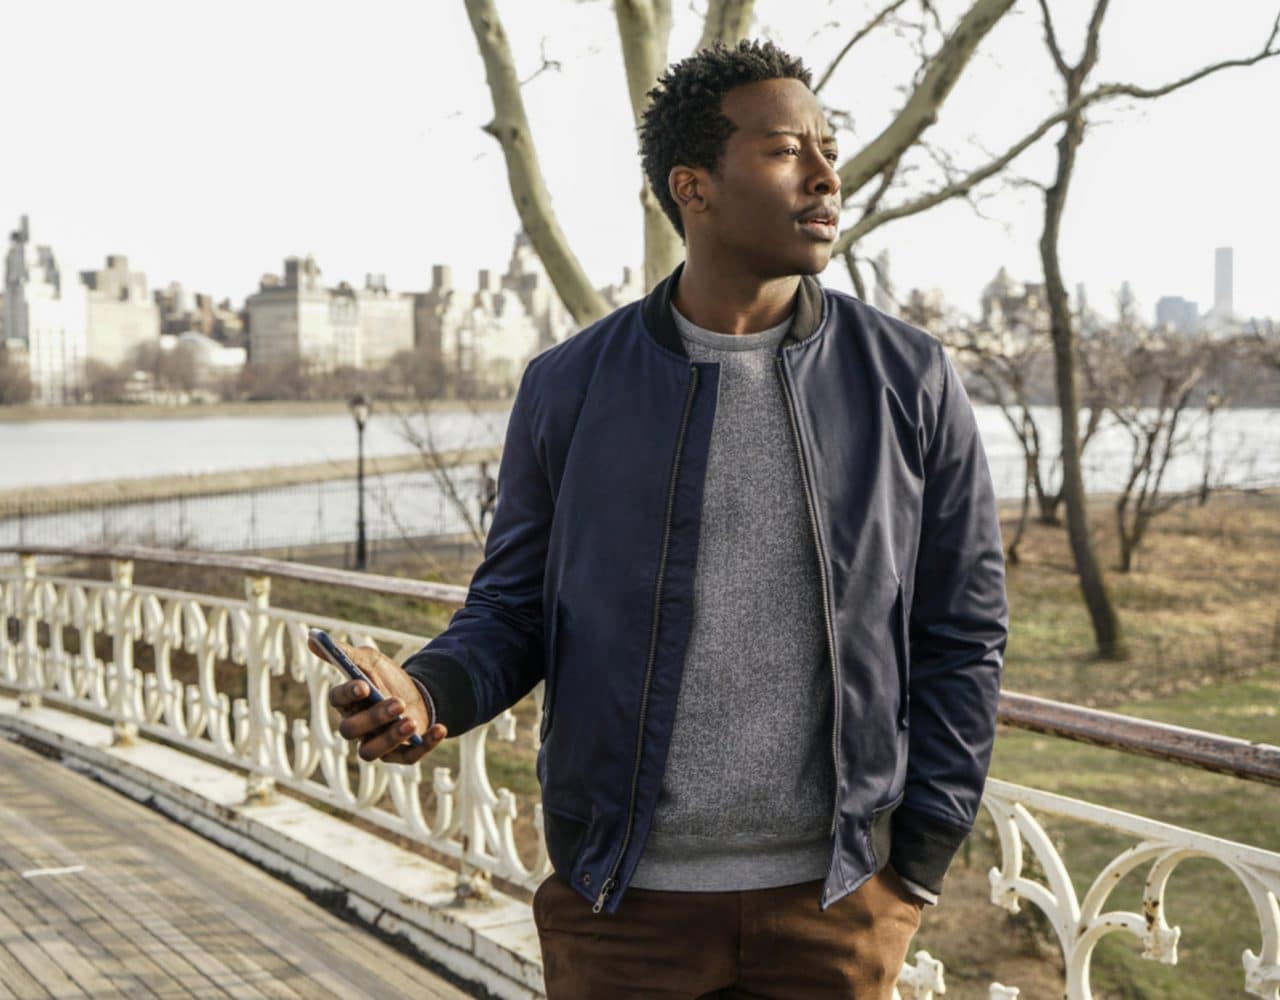 Weekly Television Drama God Friended Me Premieres on CBS This Sunday